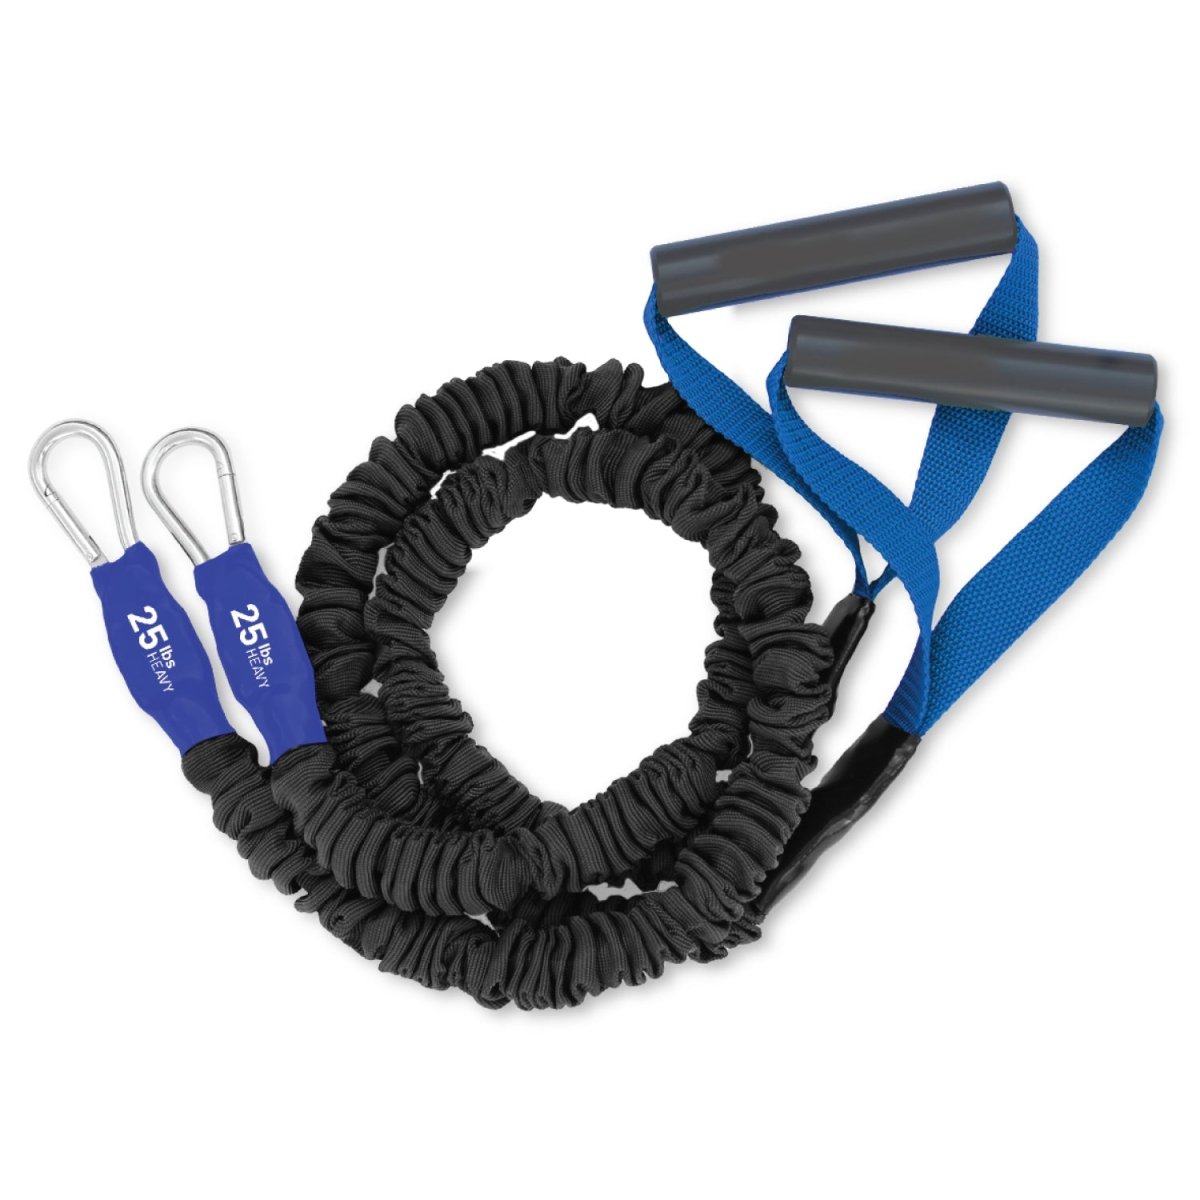 Build strong shoulders at home. This set of bands will eliminate your need to go to the gym and use the cable crossover machine. Strengthen arms, shoulders, back, scapula, axillary and core muscles using this safe covered set of resistance bands. 